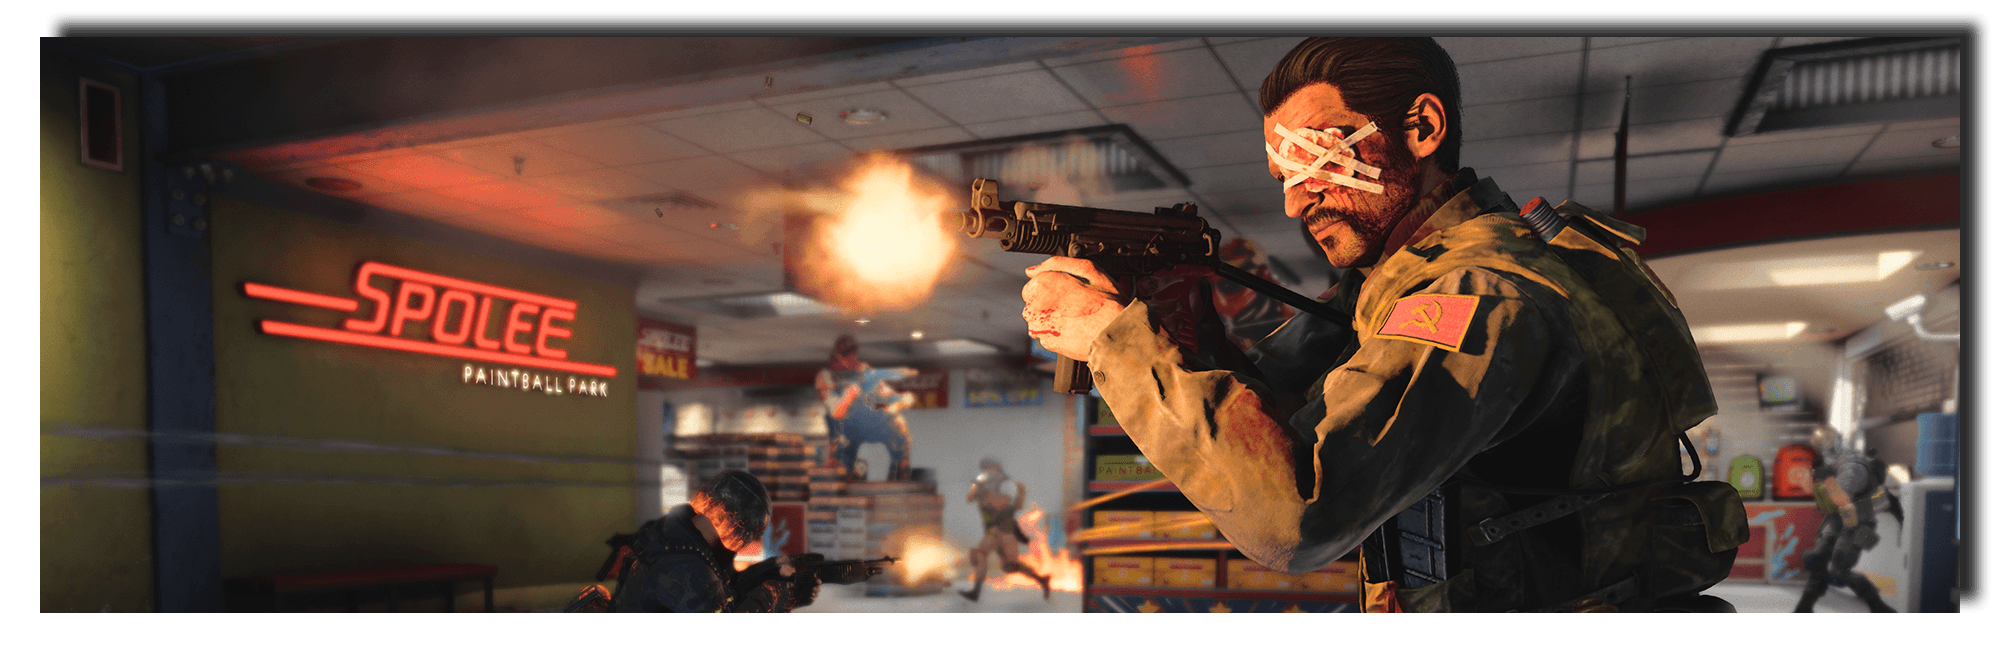 Banner image of the new OTs 9 submachine gun in action.